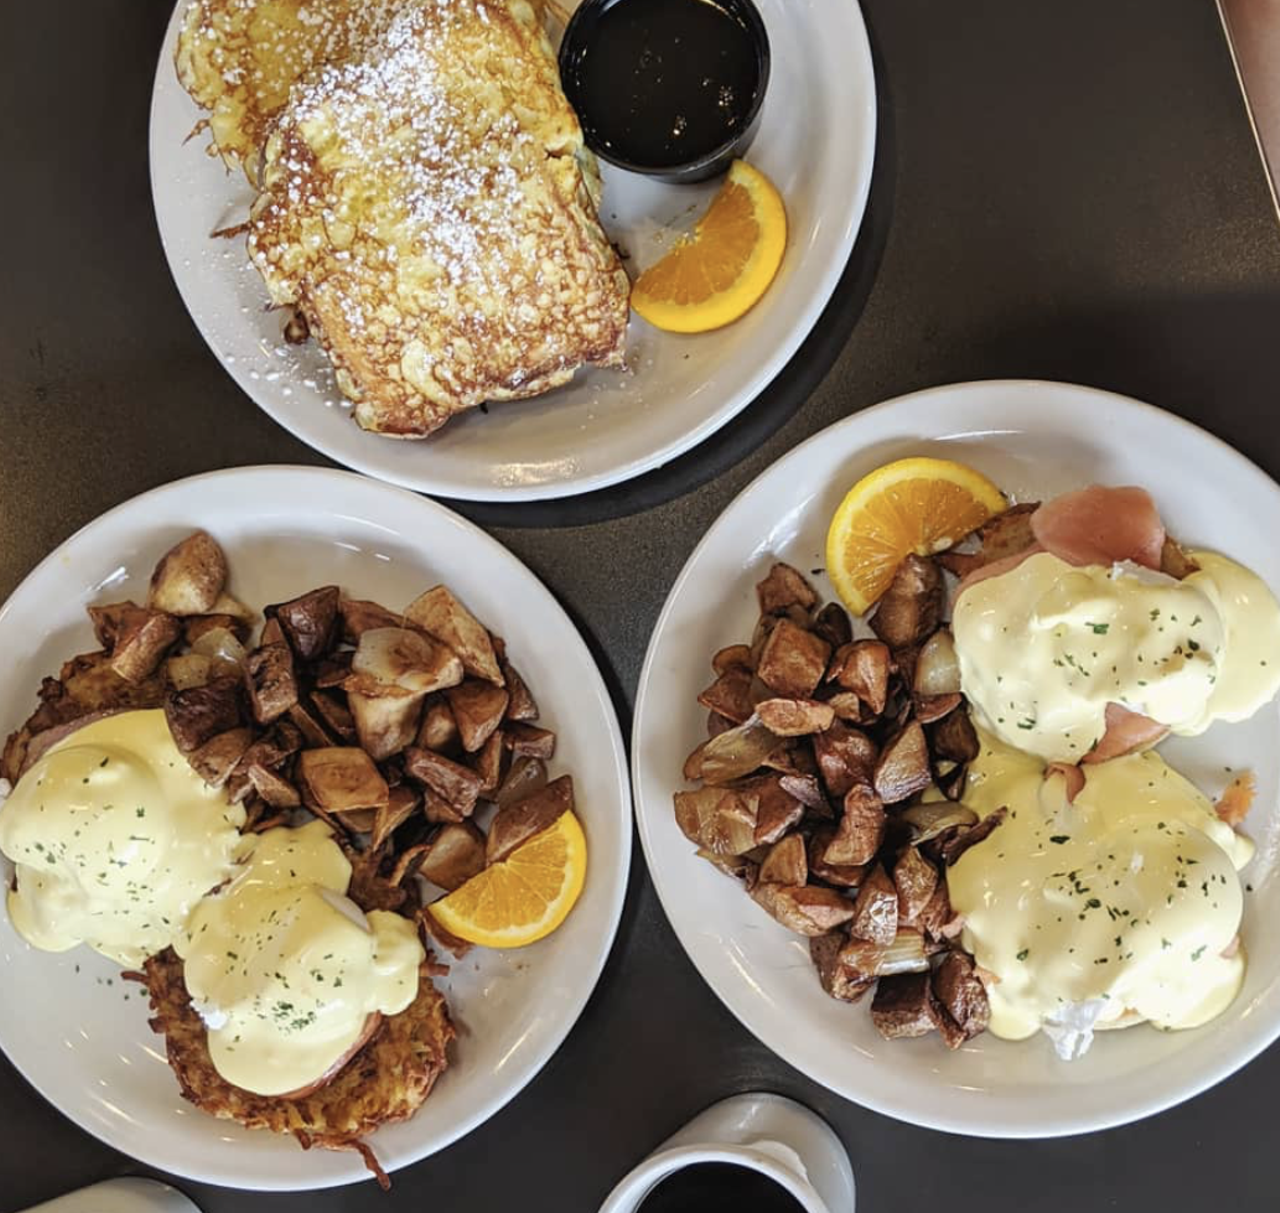 Max and Louie's New York Diner
226 W Bitters Road Suite 126, (210) 483-7600, maxandlouiesdiner.com
Delicious comfort food, breakfast served all day, jaw-dropping desserts and a full bar — what more could you ask for in a diner? 
Photo via Instagram /  
linhnie_